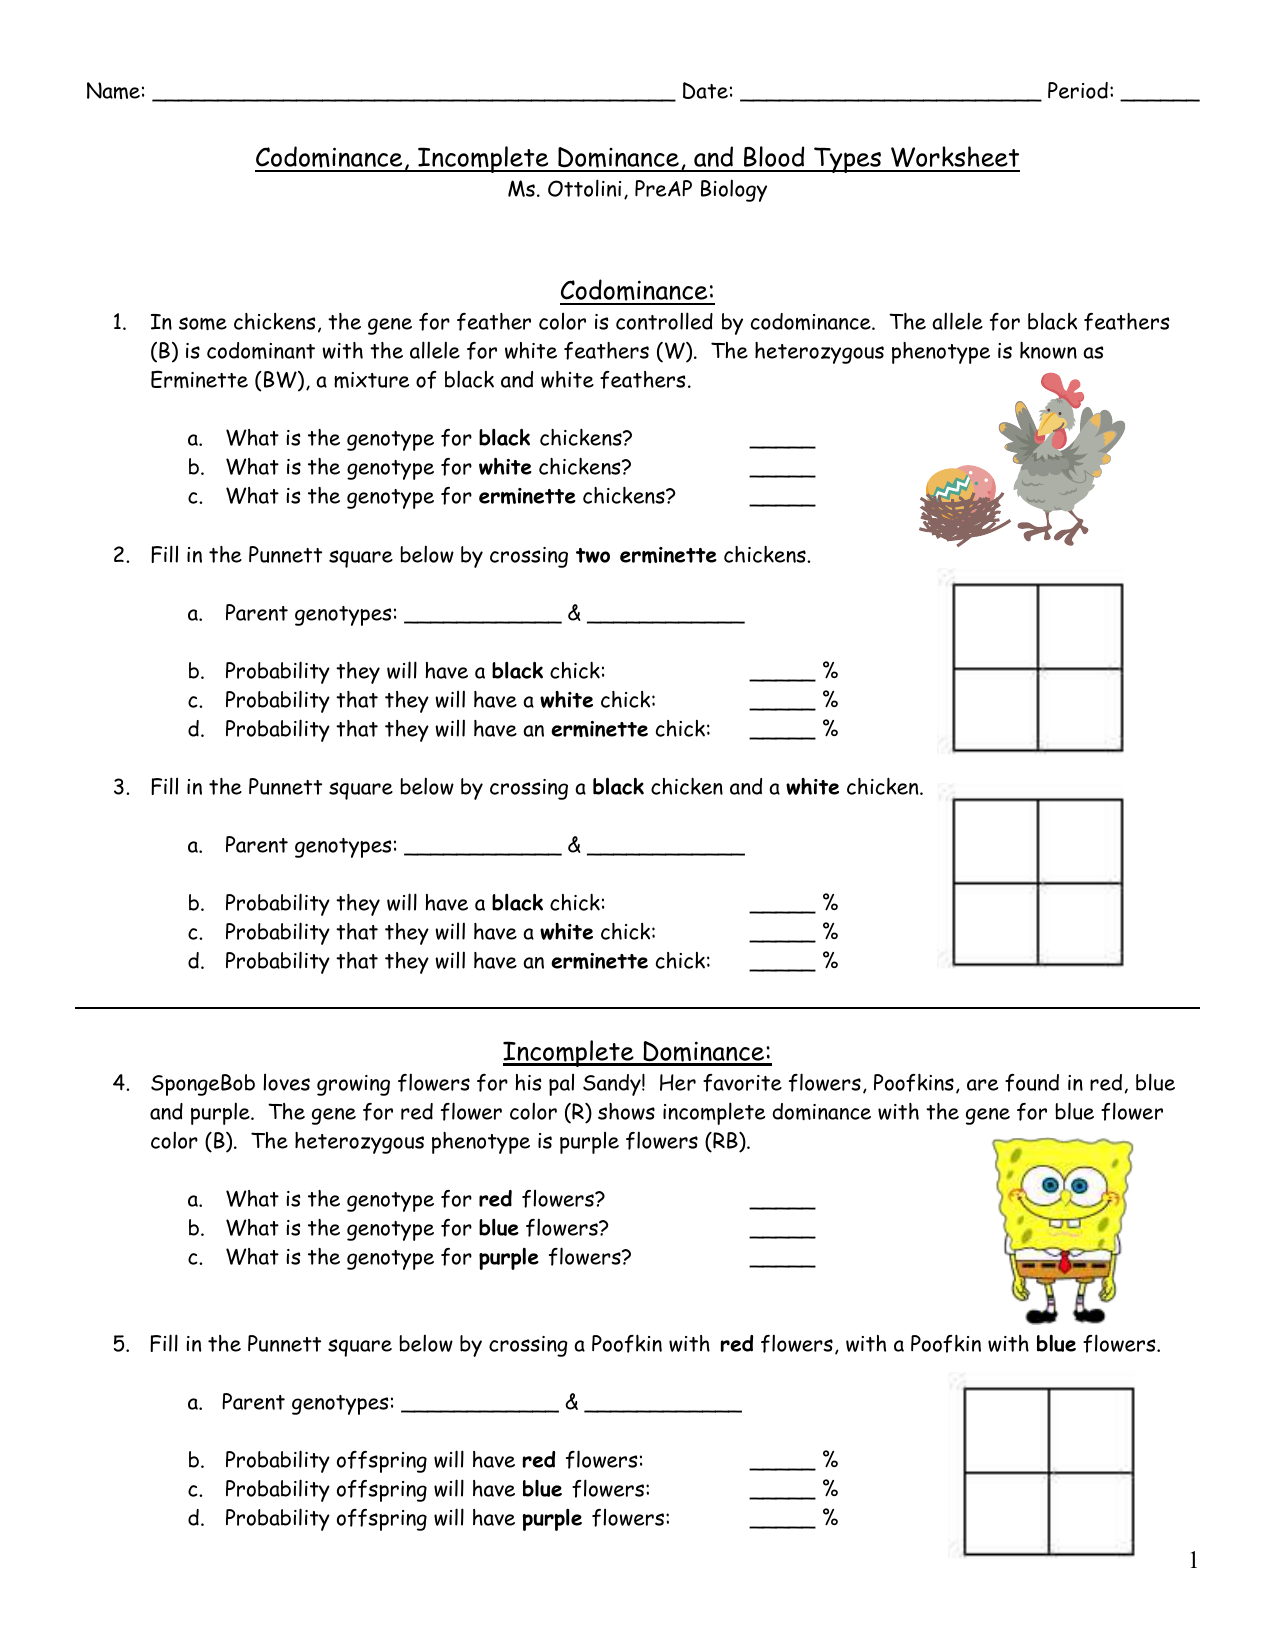 Codominance, Incomplete Dominance, and Blood Types Worksheet Intended For Codominance Worksheet Blood Types